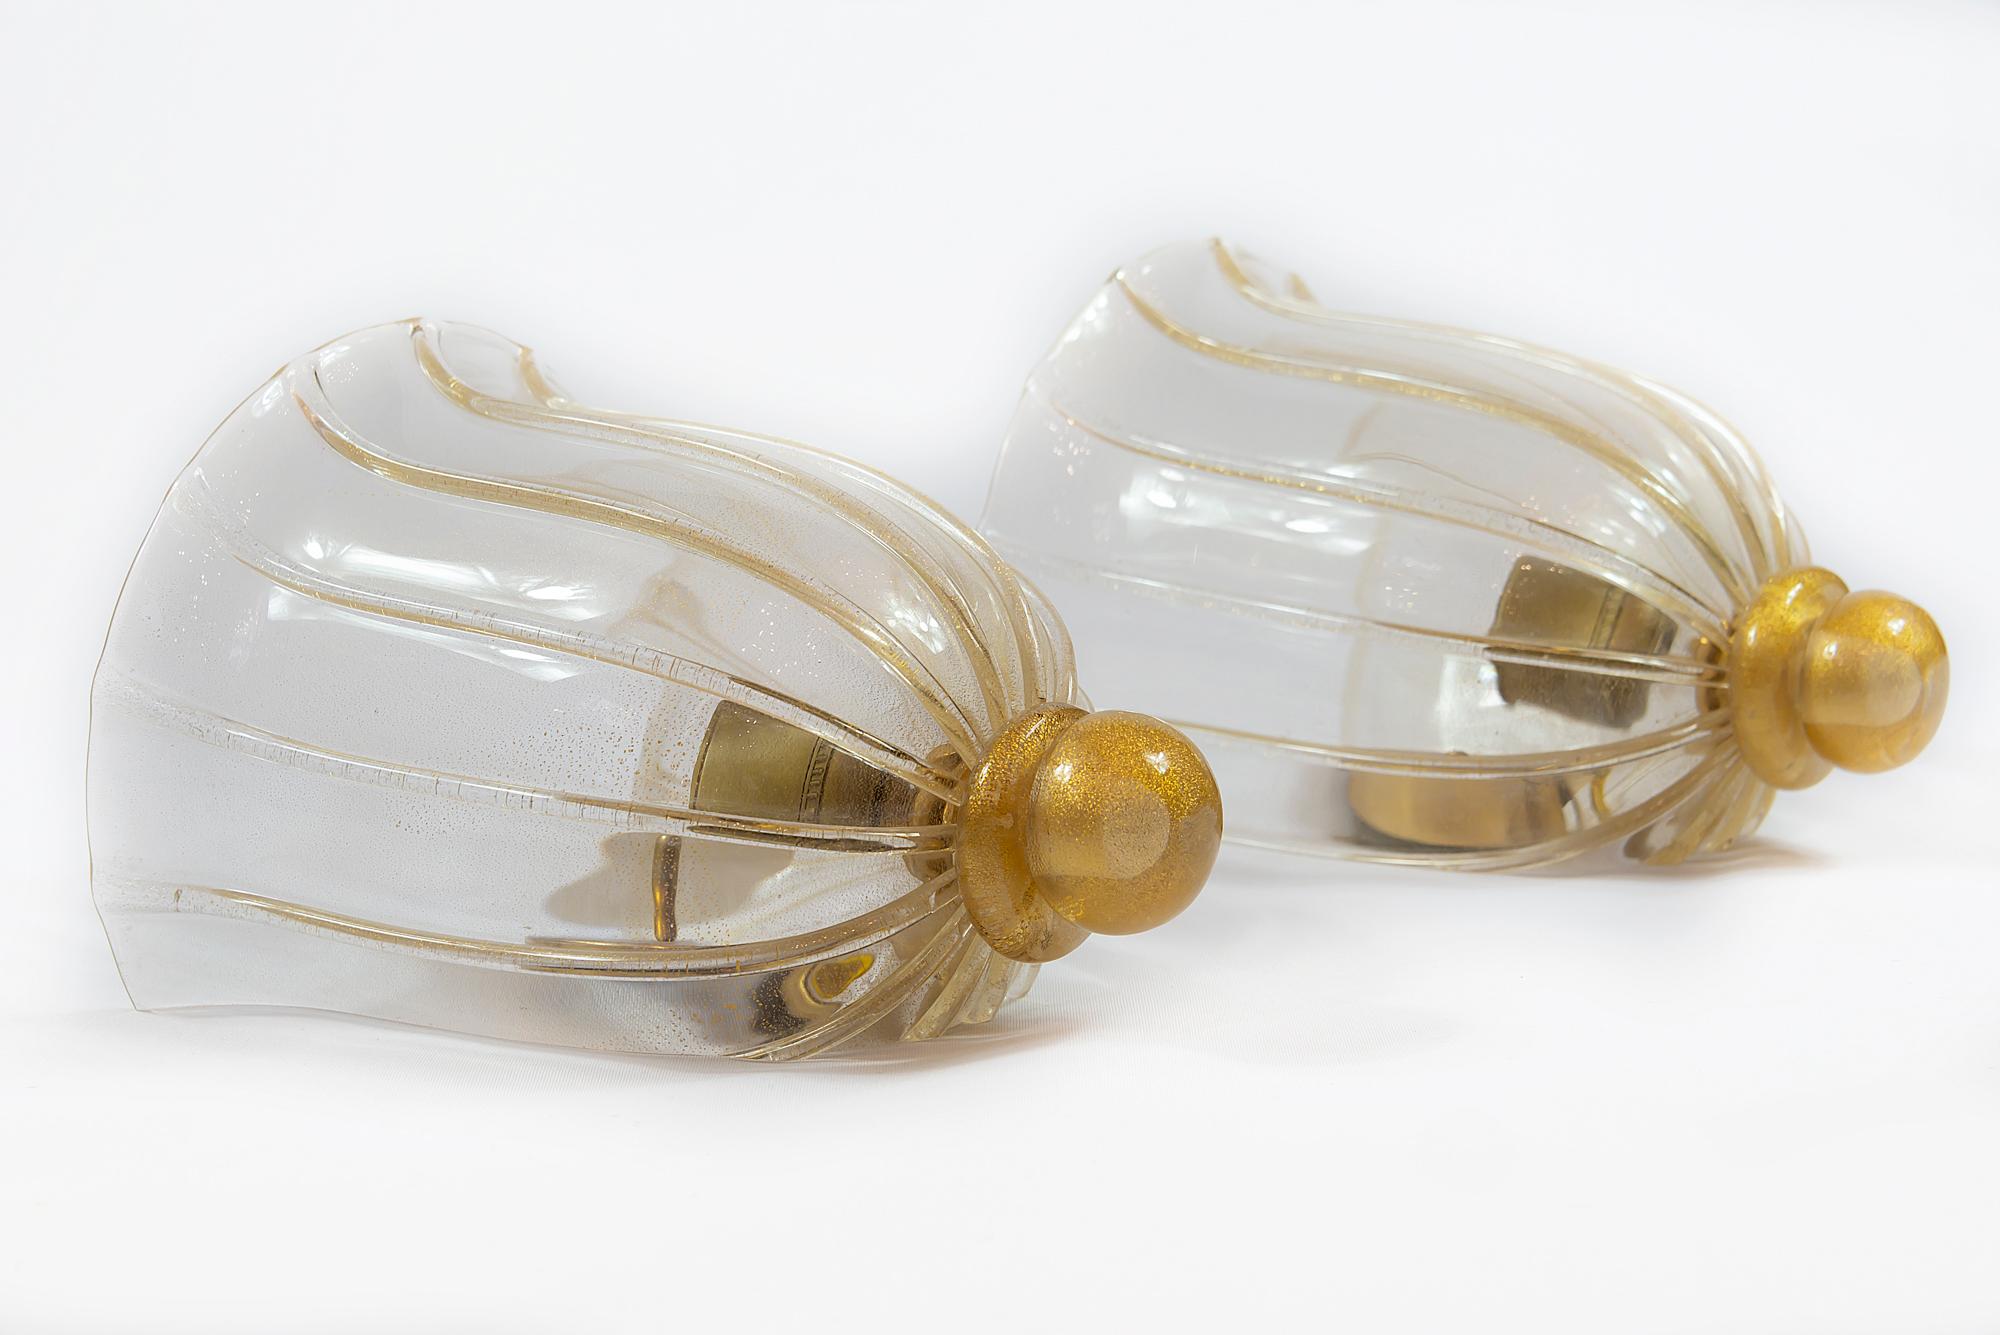 Mid-Century Modern Pair of Italian Murano Glass and Brass Wall Light Sconces by Seguso, circa 1970